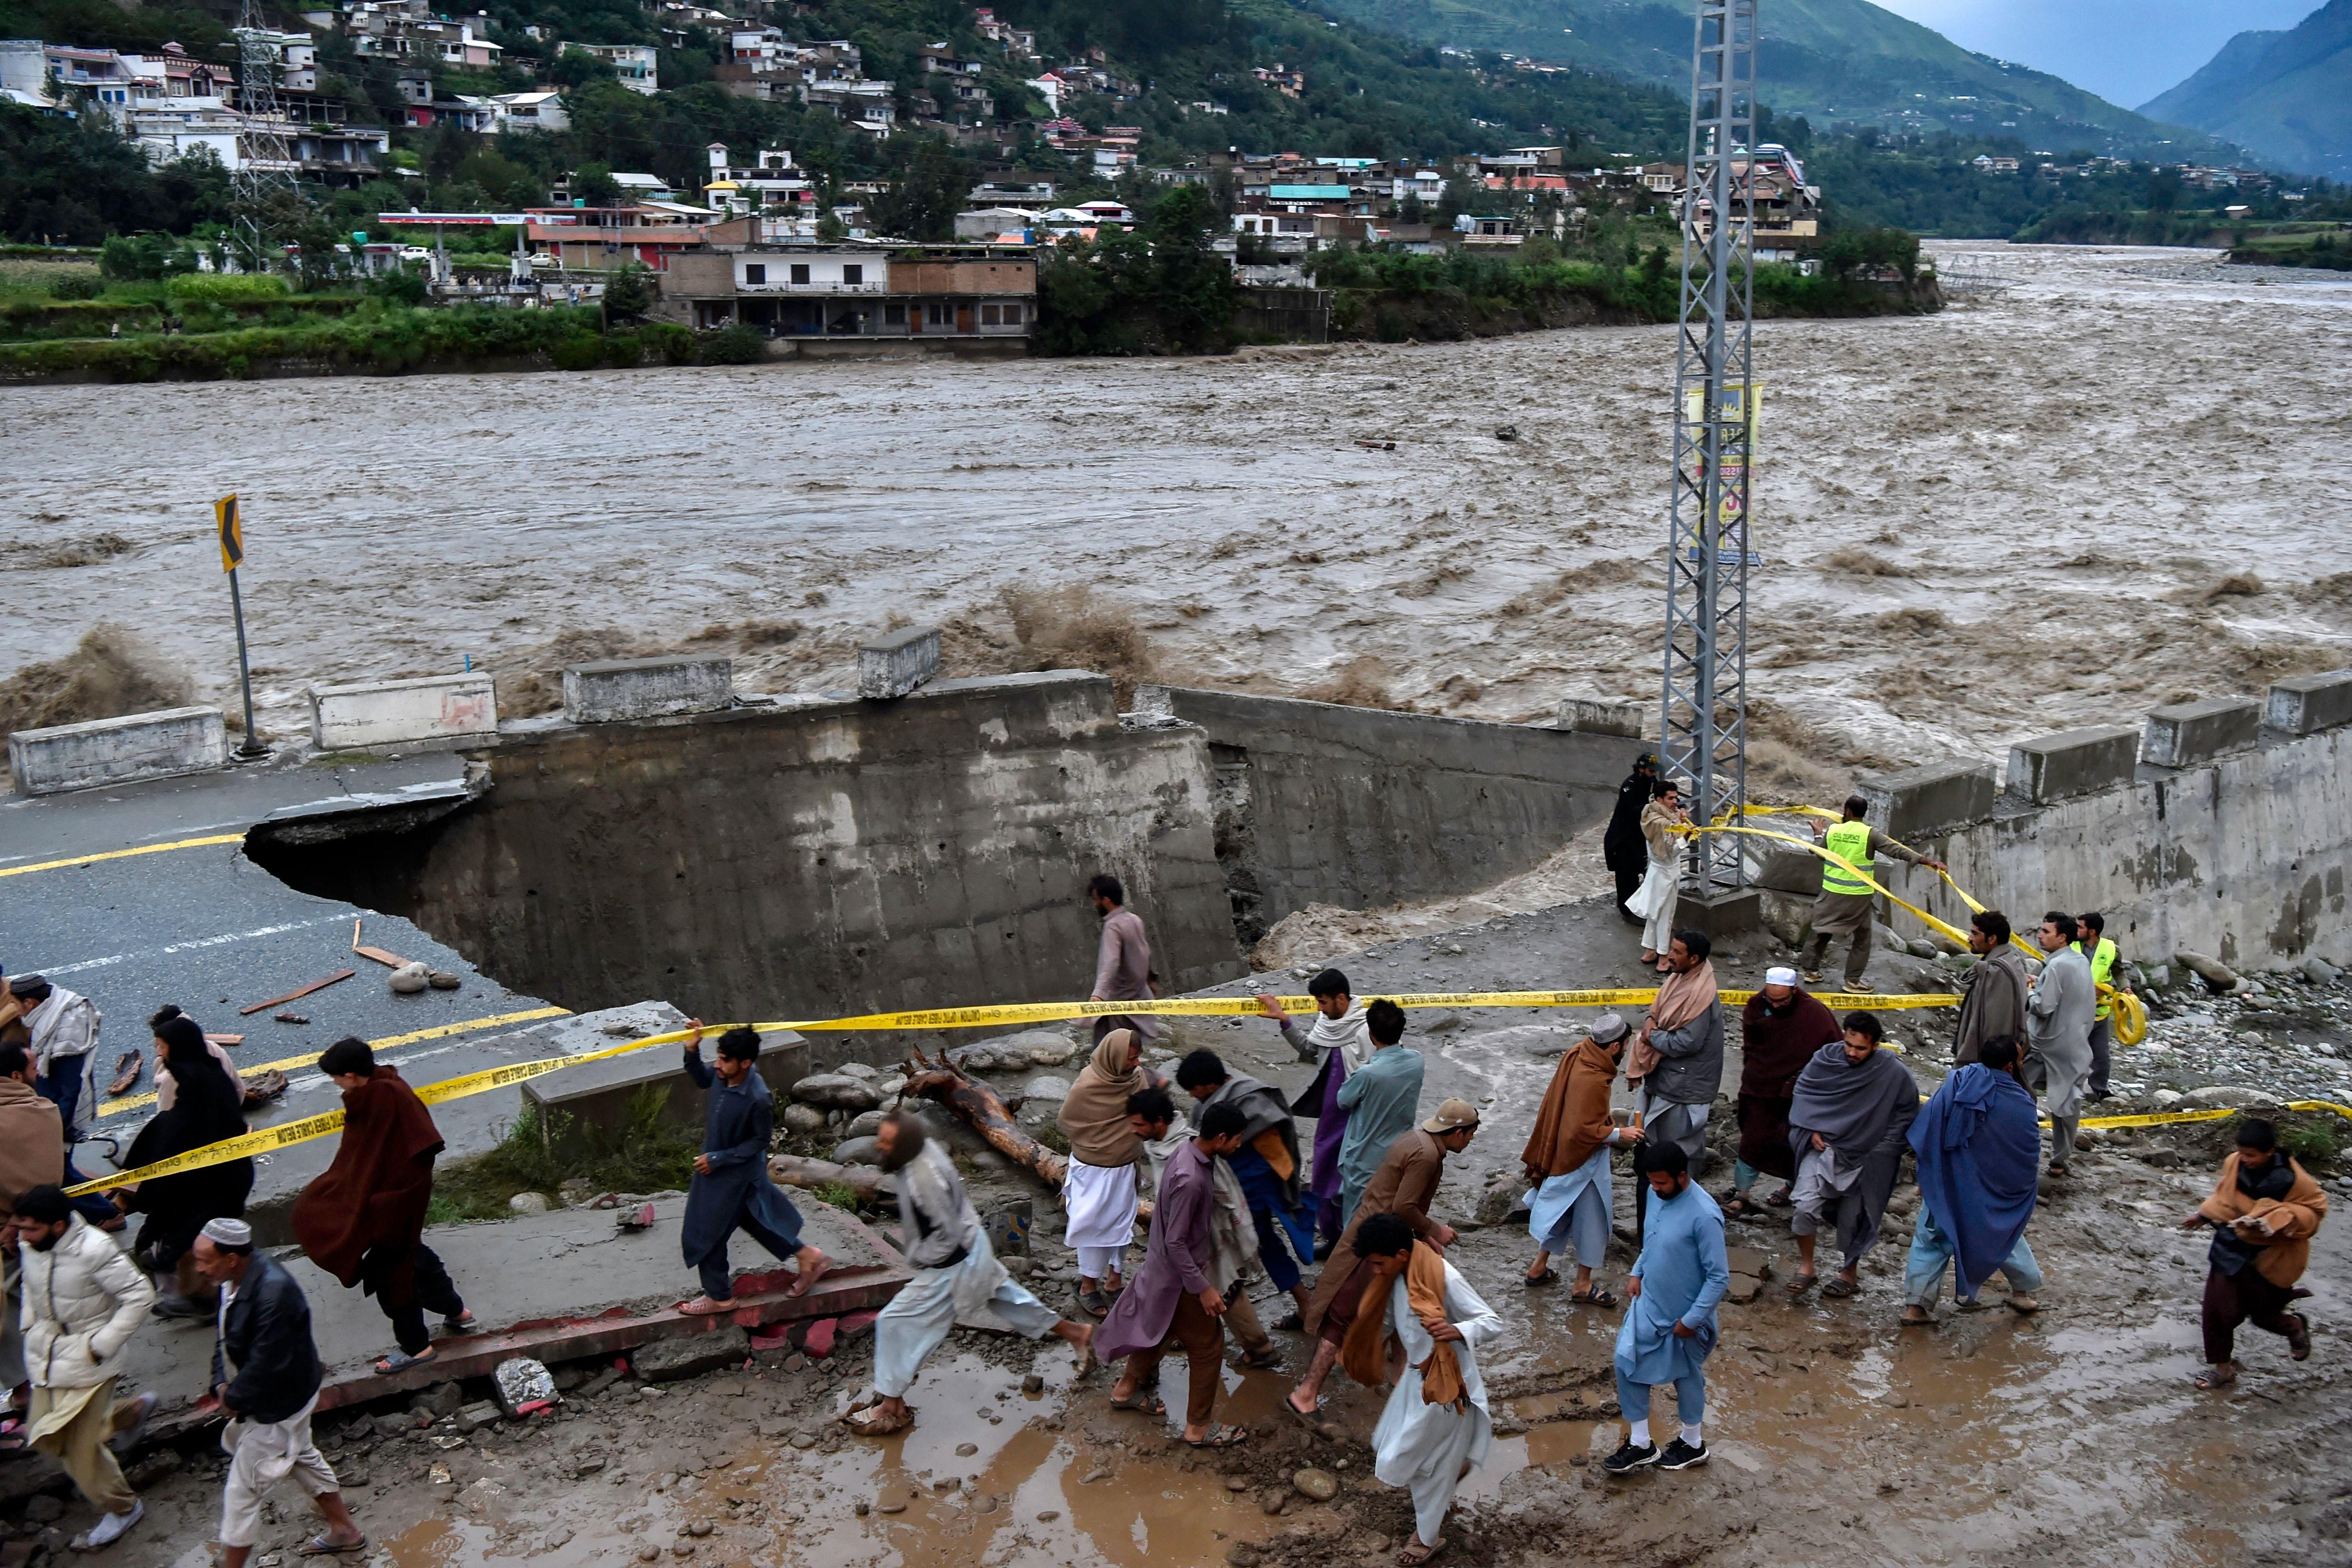 People gather in front of a road damaged by heavy monsoon rains in Madyan, Pakistan on August 27, 2022.